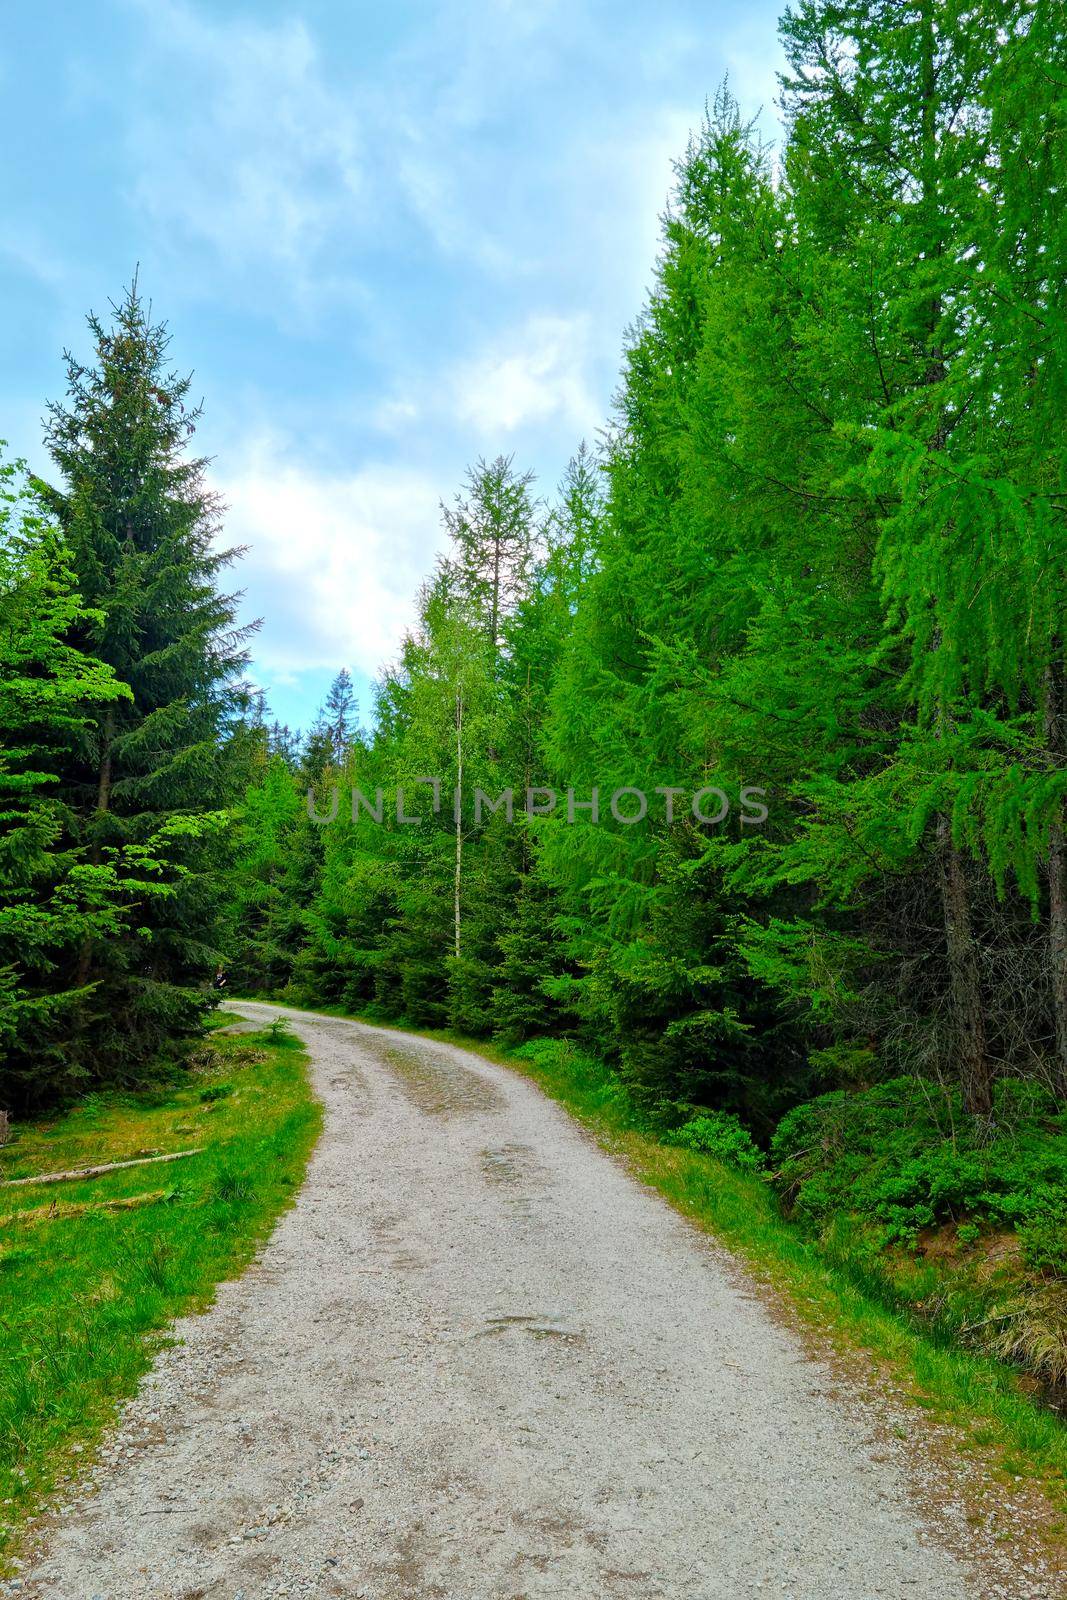 A picturesque forest road along green trees